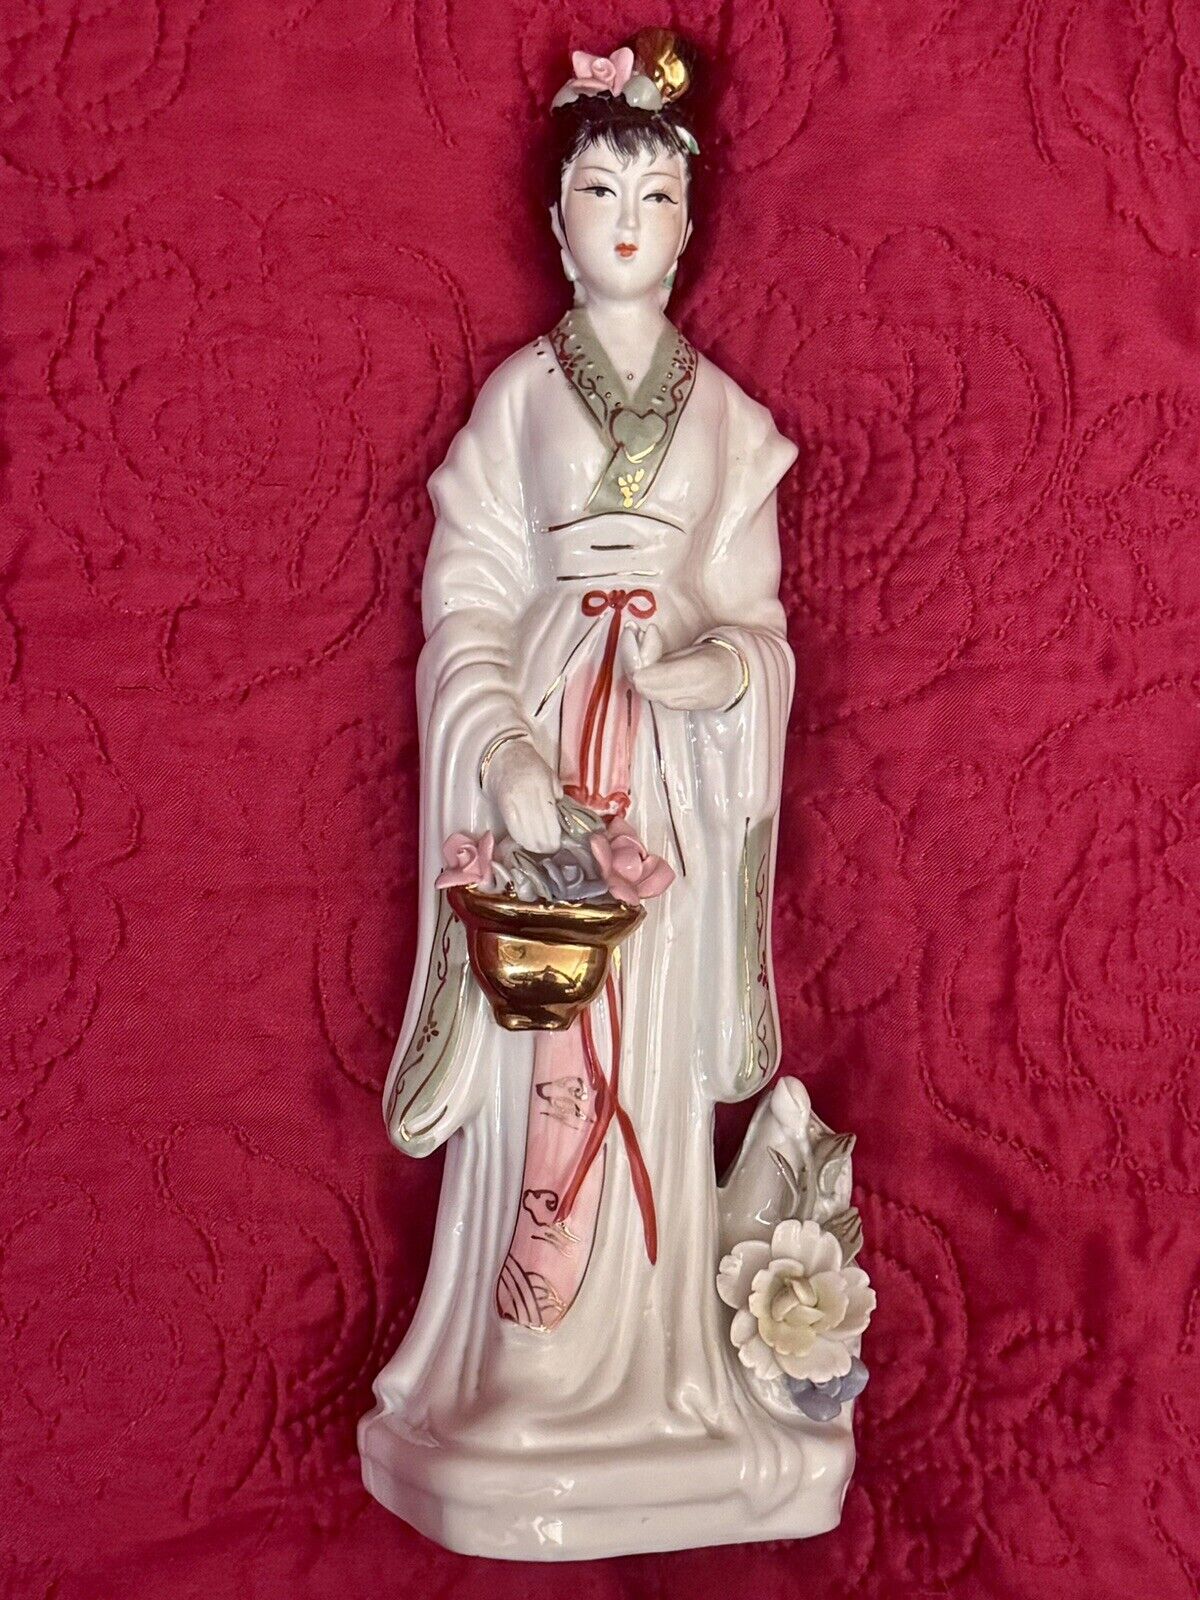 Vintage Chinese Porcelain Figurine of a Geisha Girl Lady with Flowers